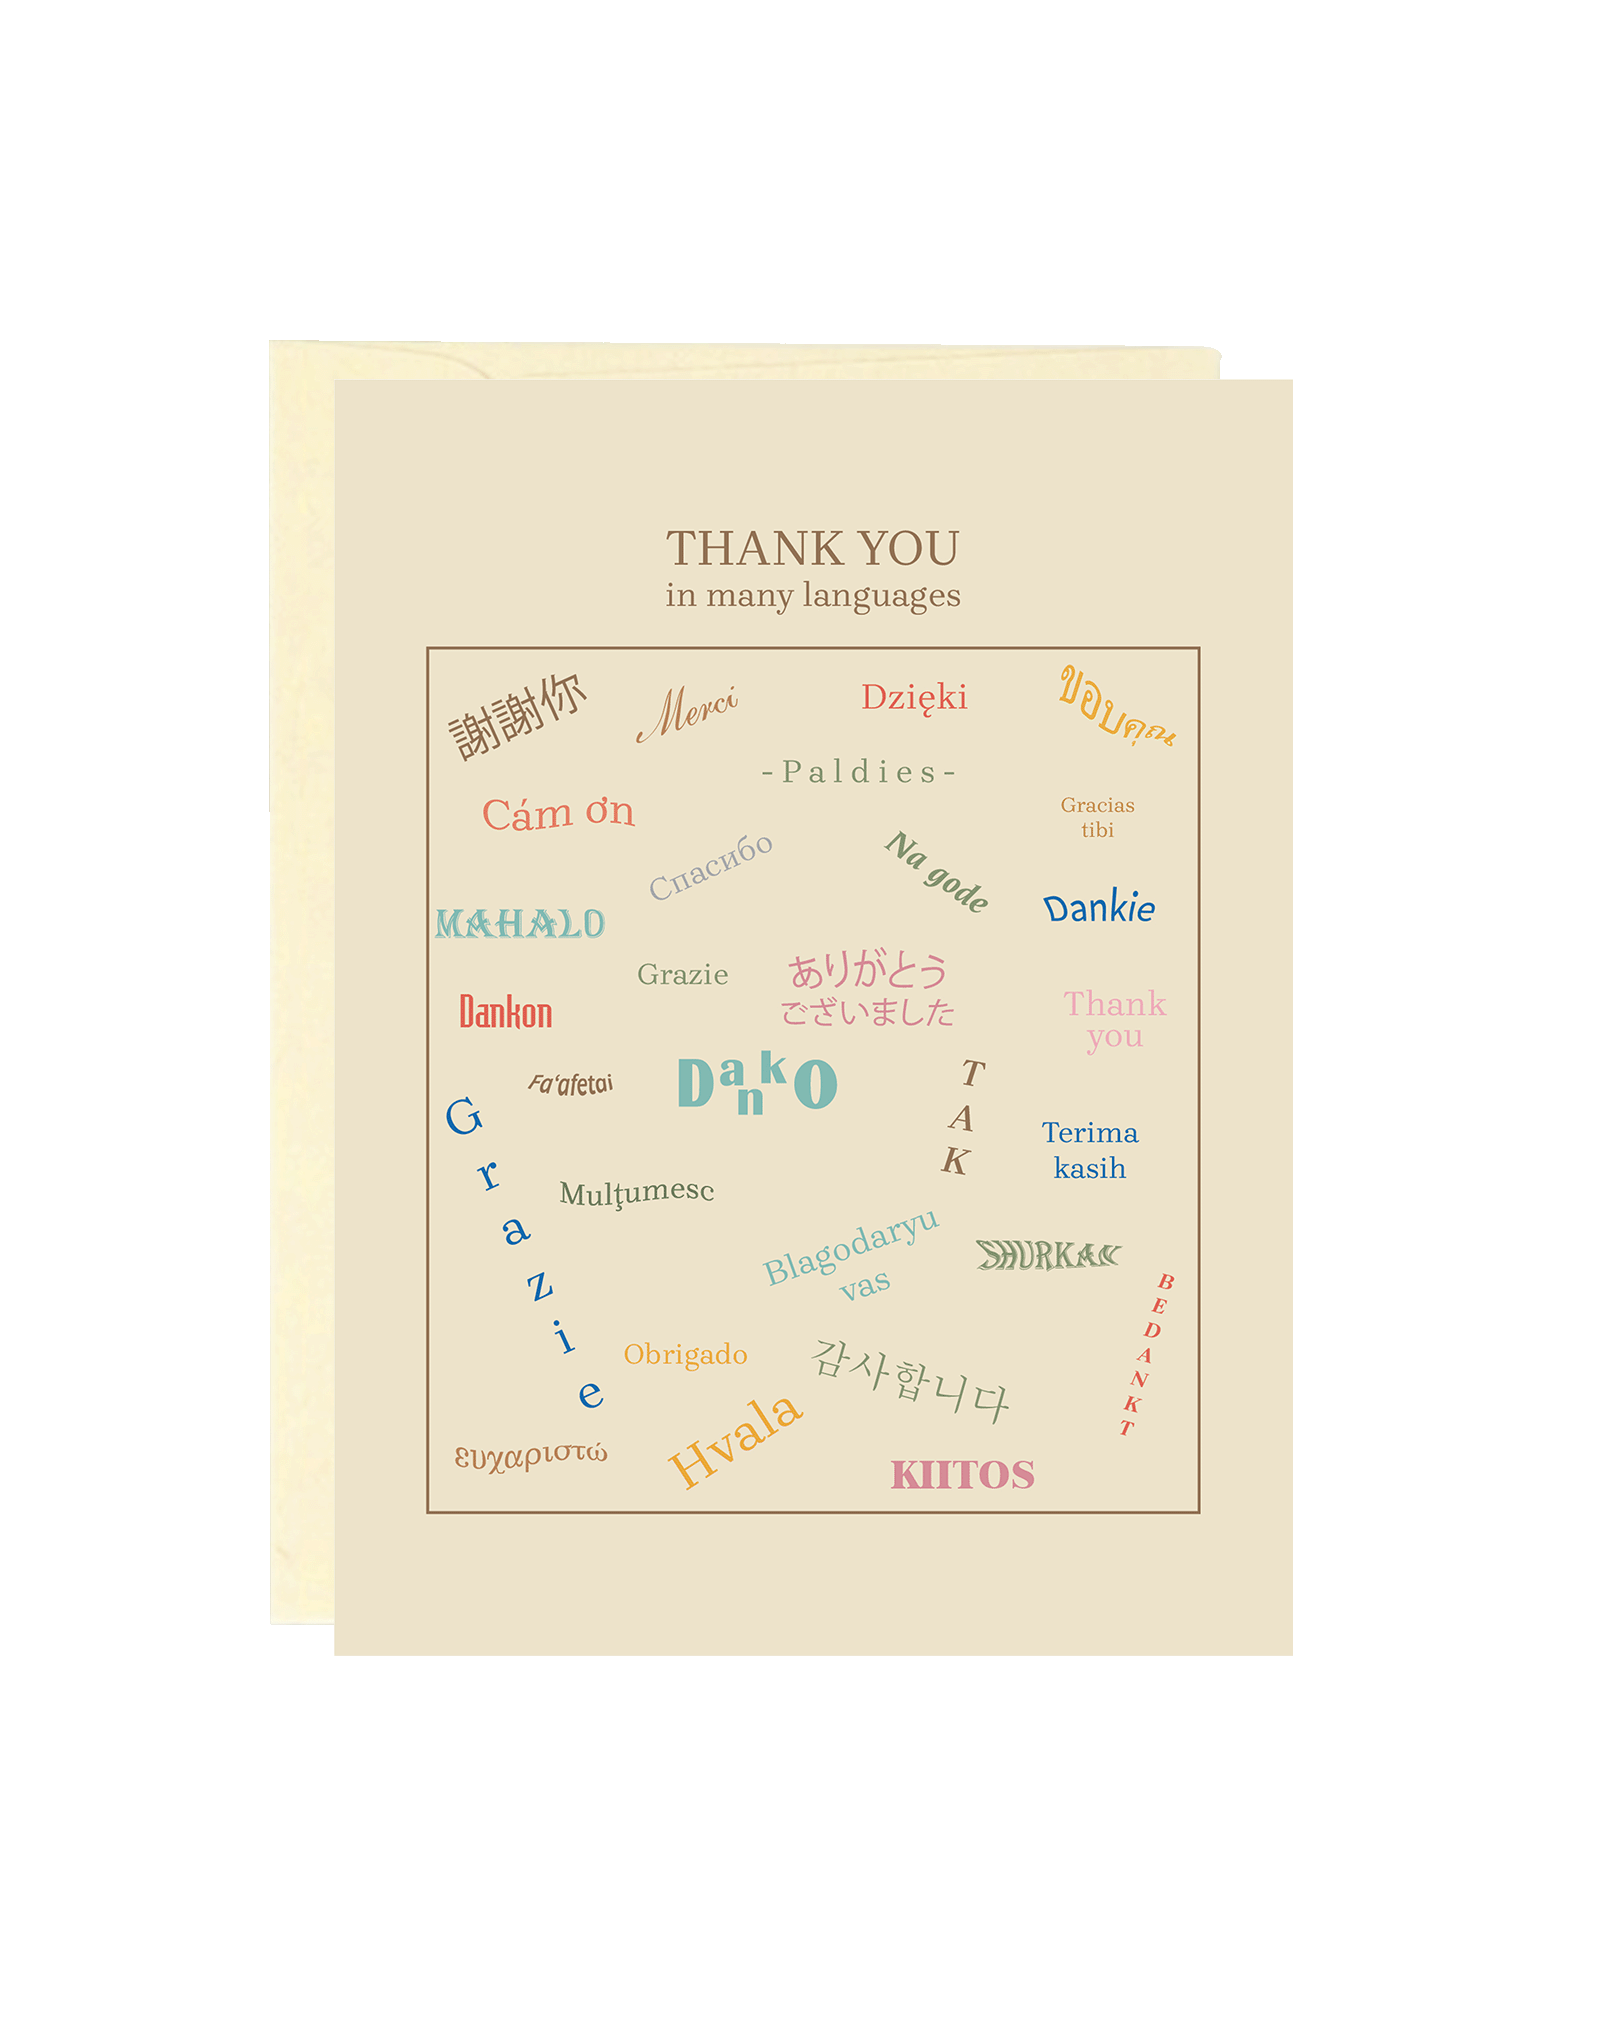 THANK YOU CARD - "Thank You" in Many Languages